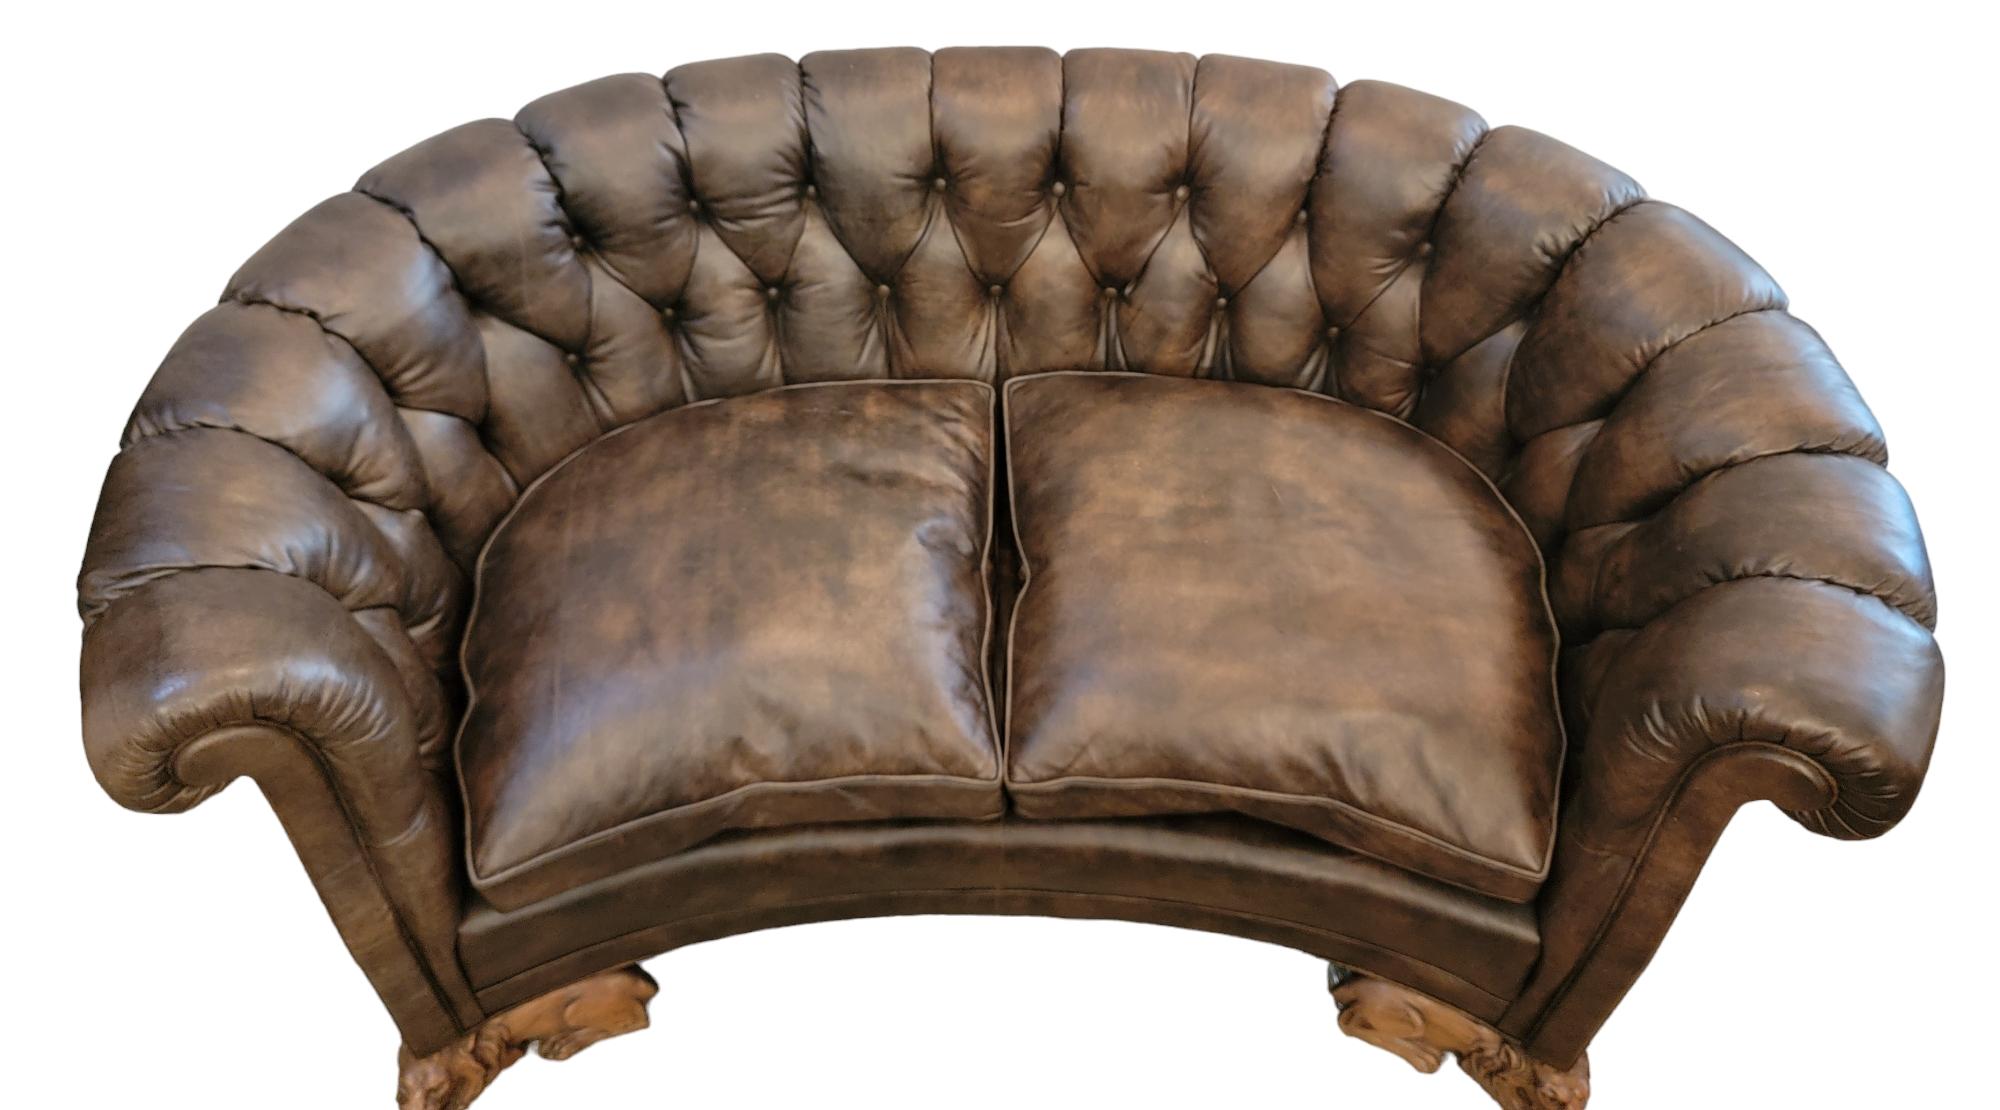 Chesterfield Antique English Chester field Sofa with Hand Carved Wood Lion Legs For Sale